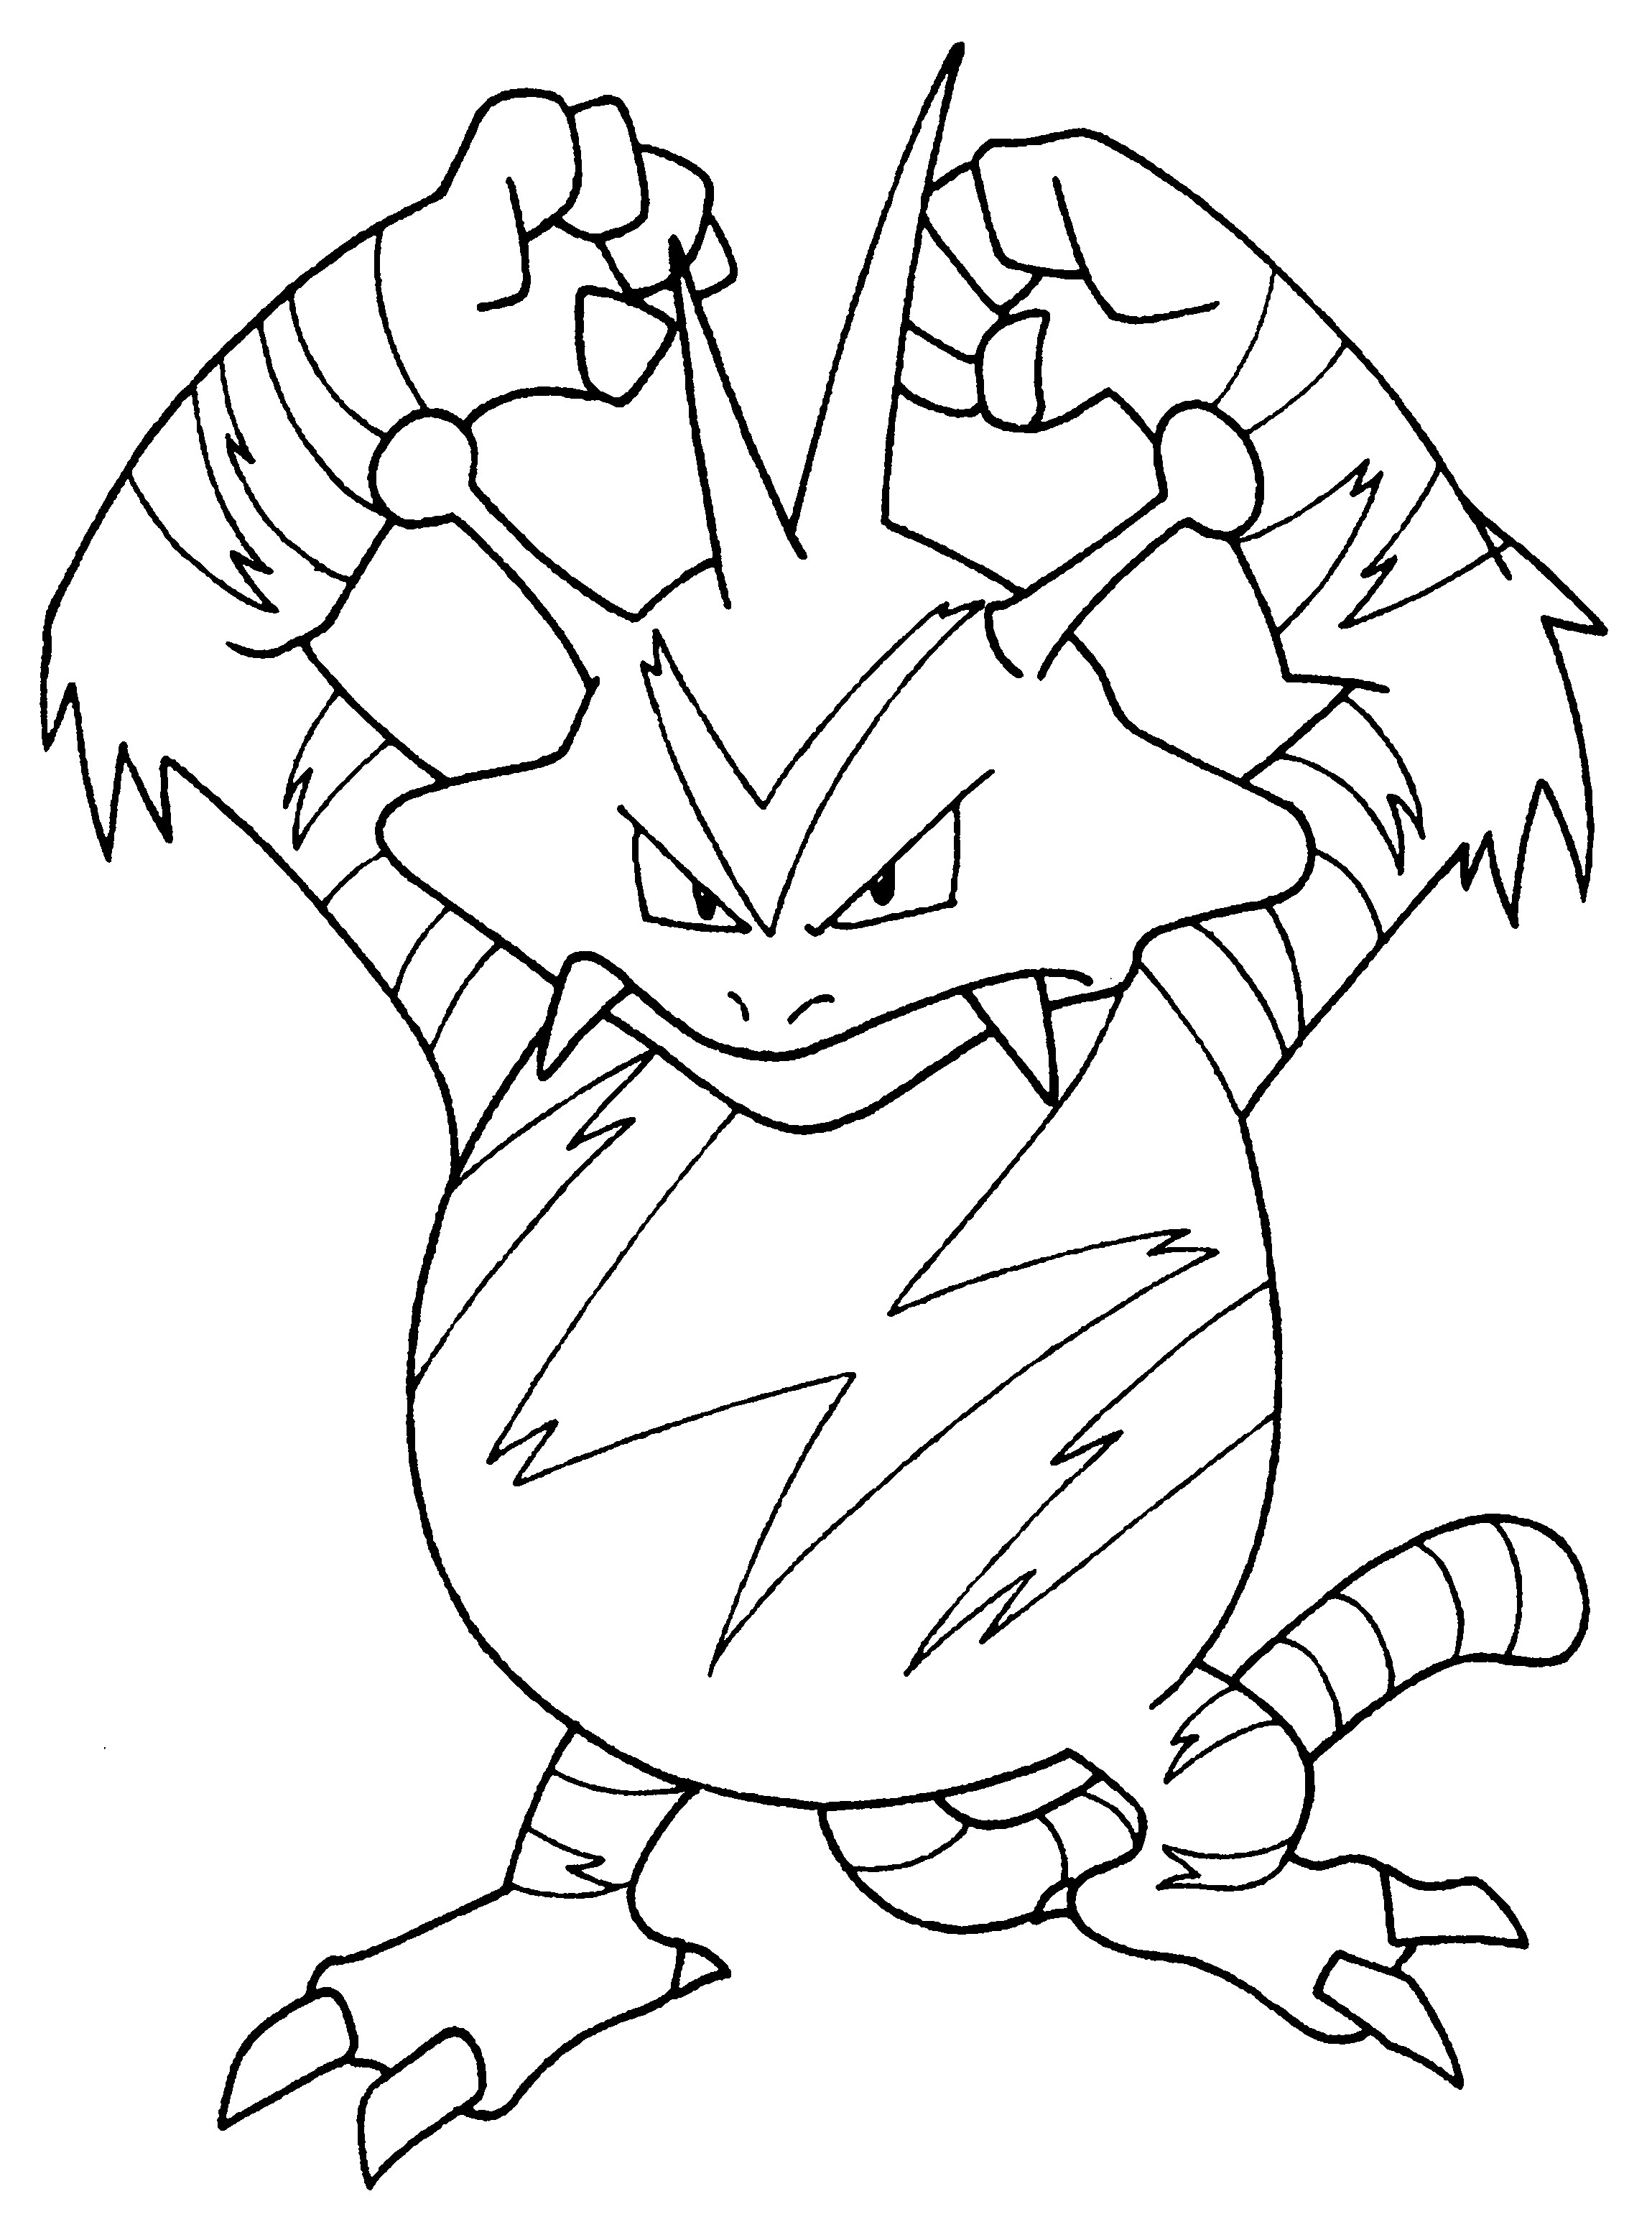 Free Coloring Pages Pokemon
 Pokemon Coloring Pages Join your favorite Pokemon on an